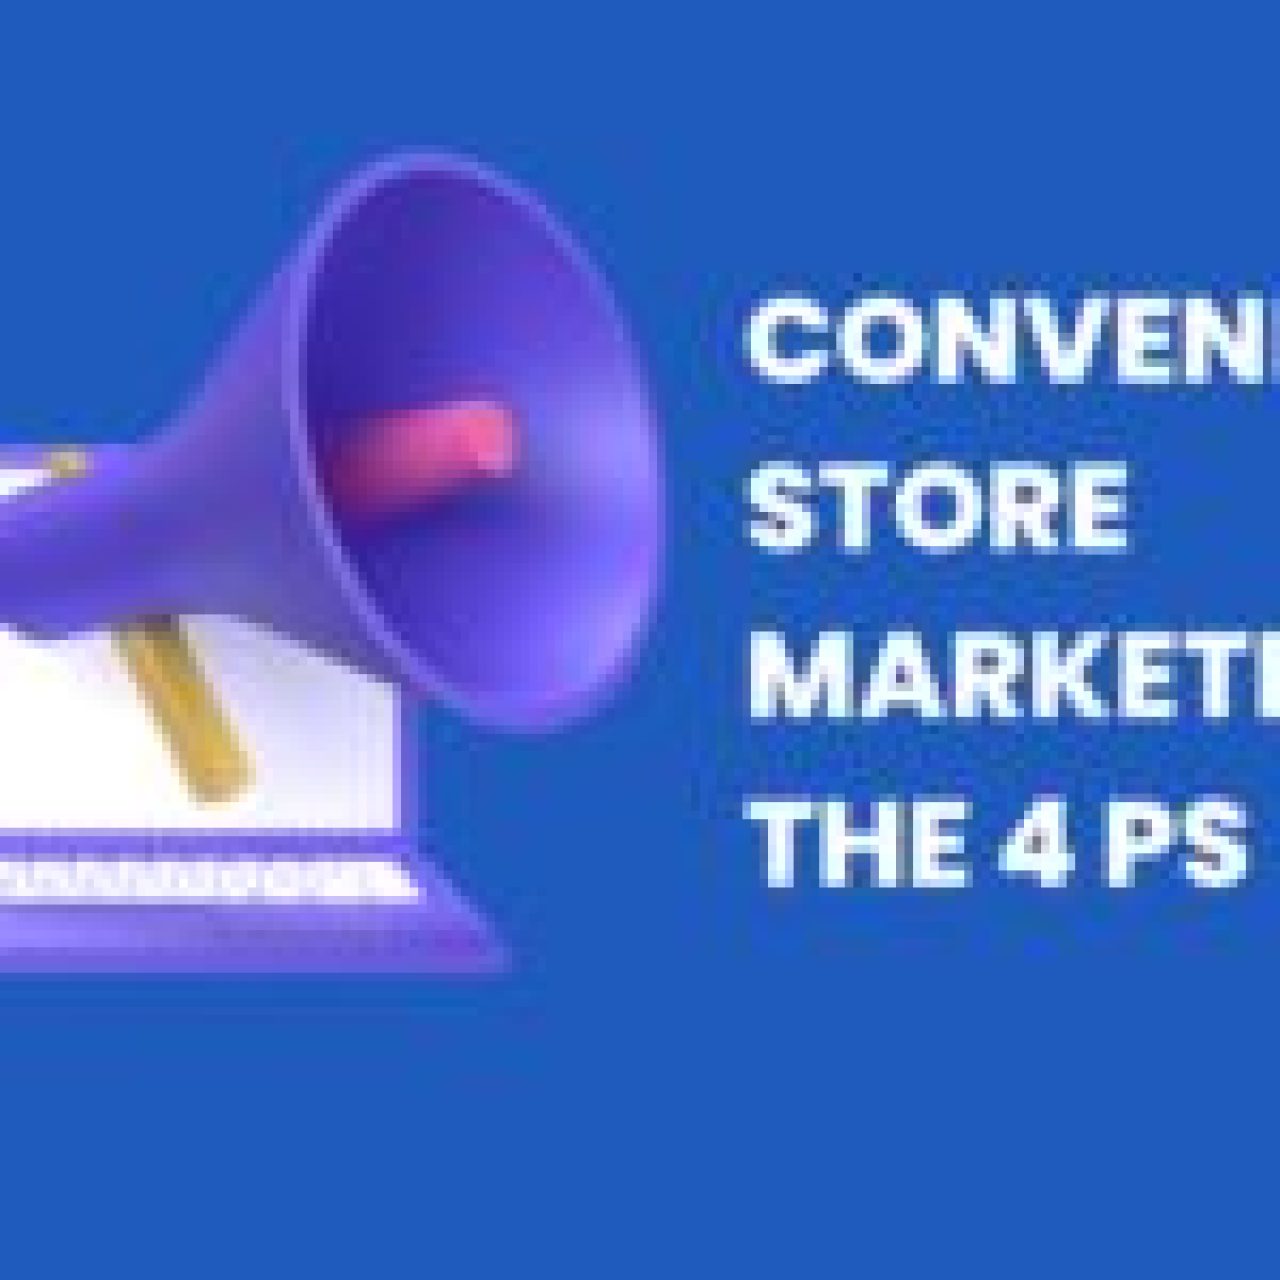 Convenience-Store-Marketing-And-The-4-Ps-By-Renaissance-Marekting-1-1